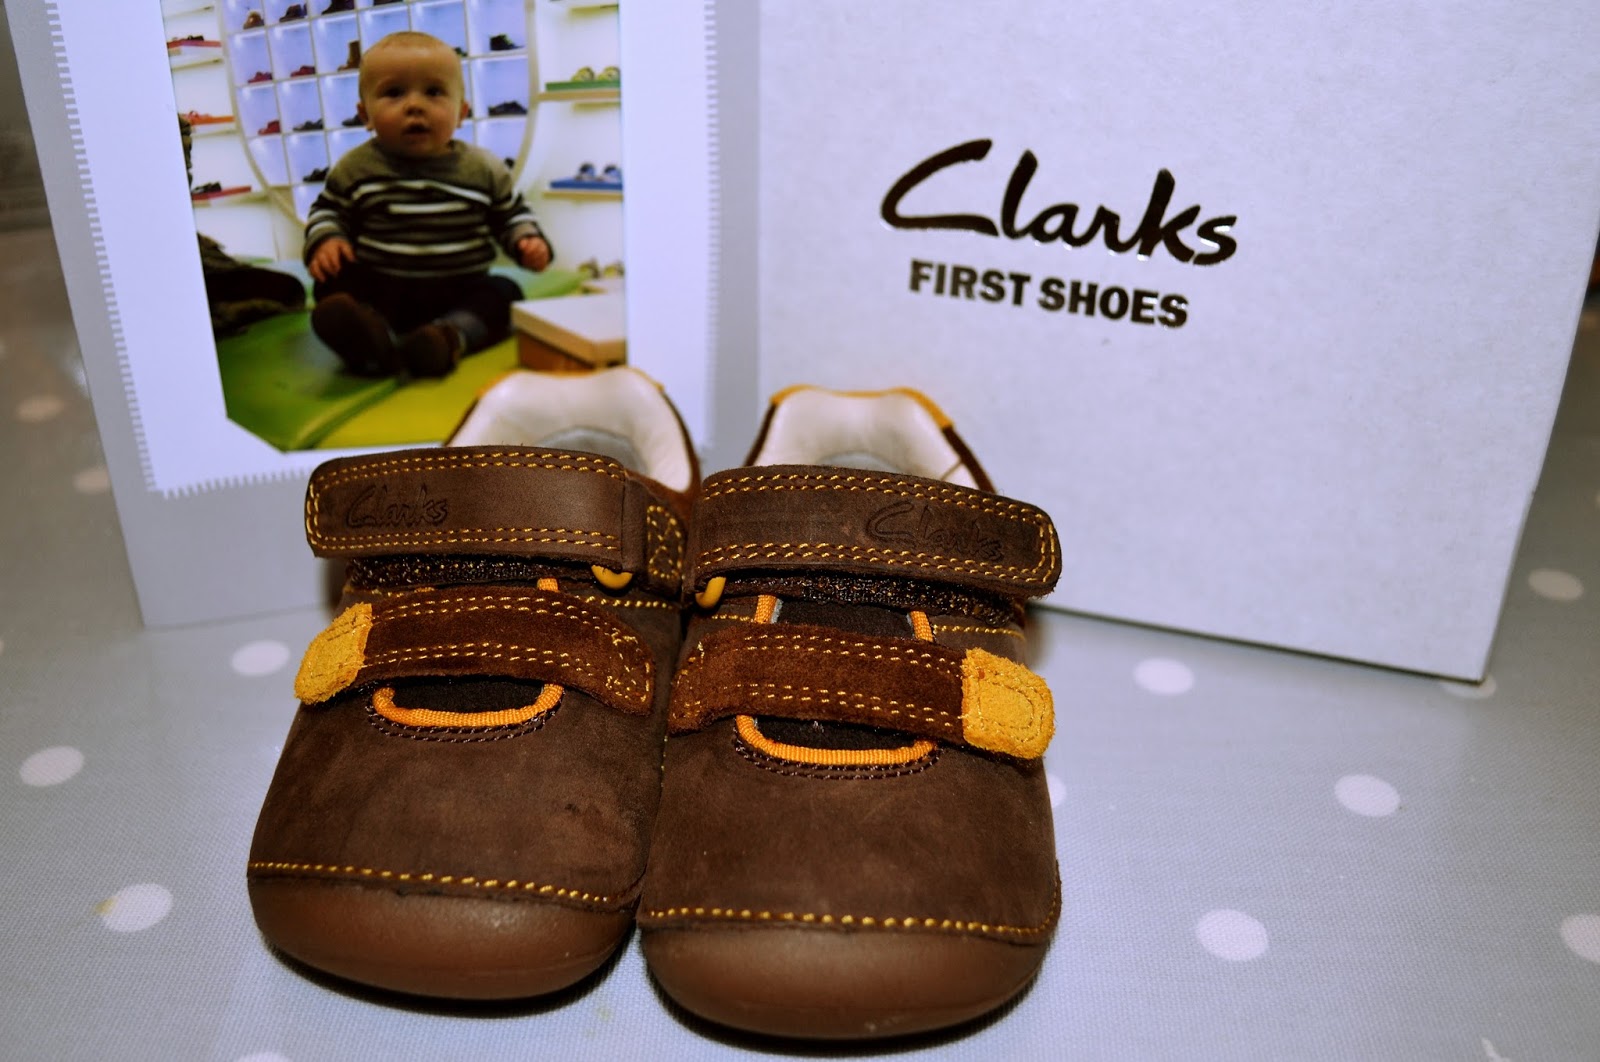 clarks first shoes experience